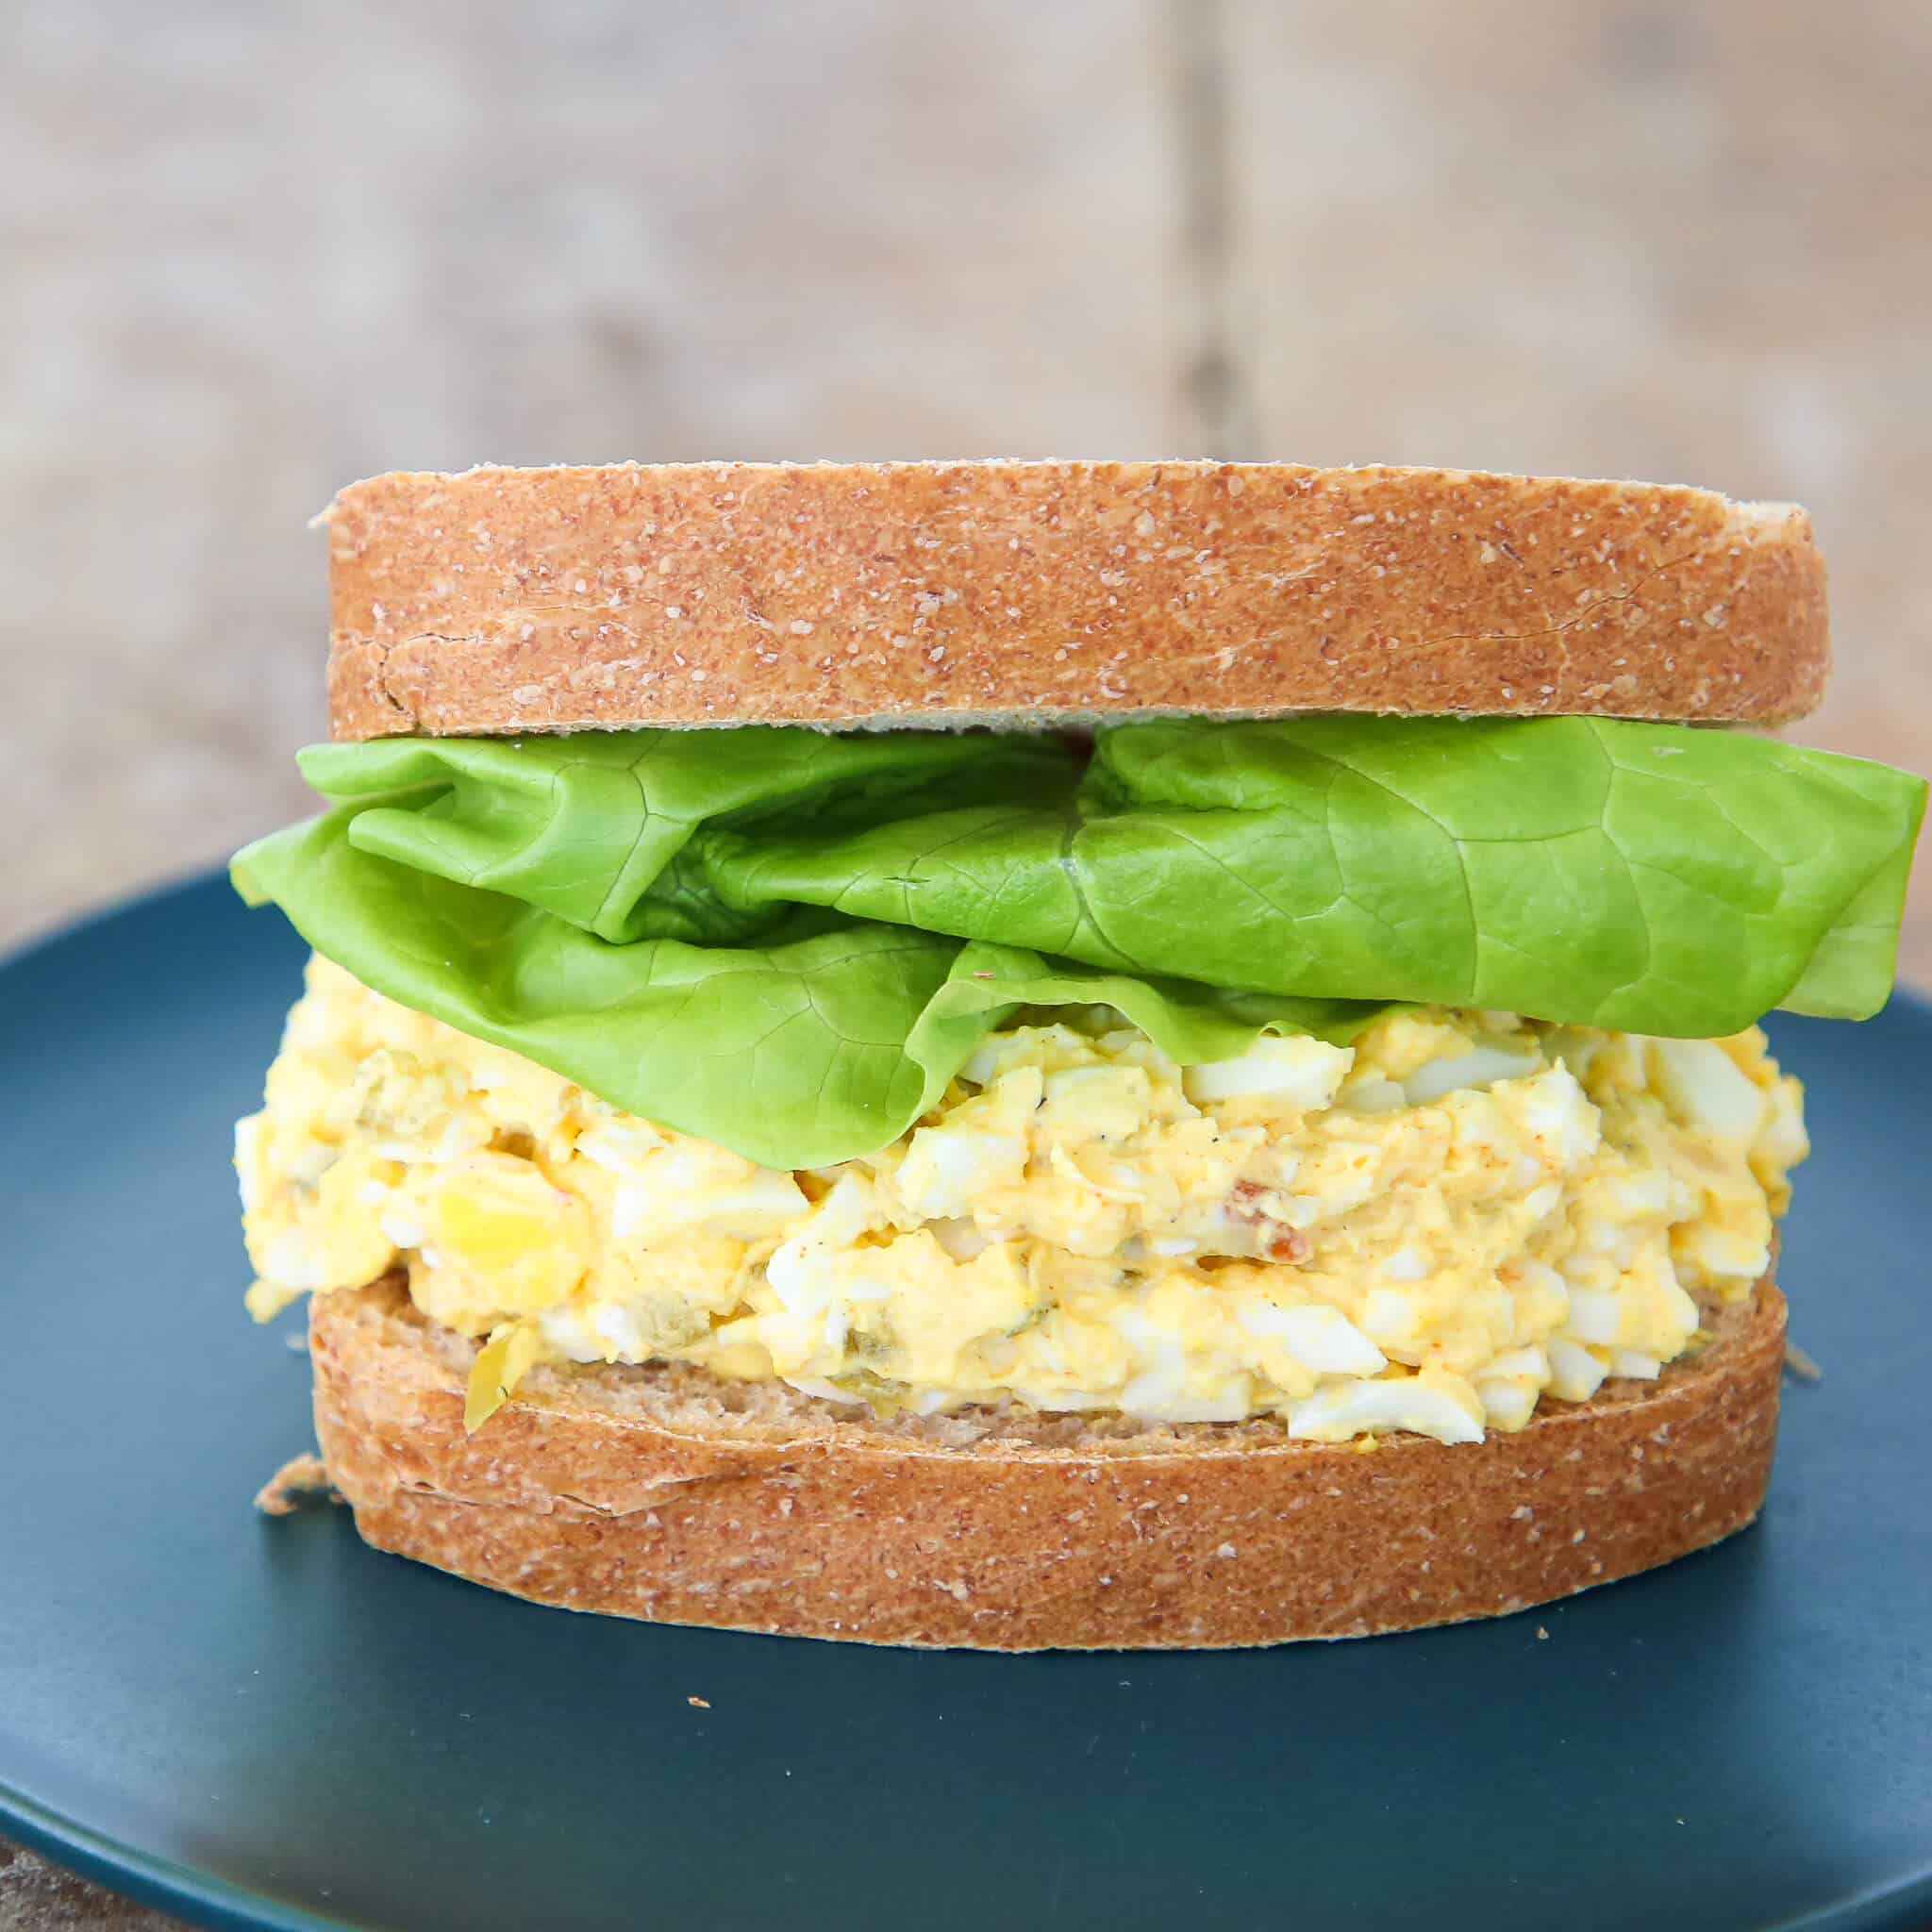 Two egg salad sandwiches assembled with lettuce and whole wheat bread.